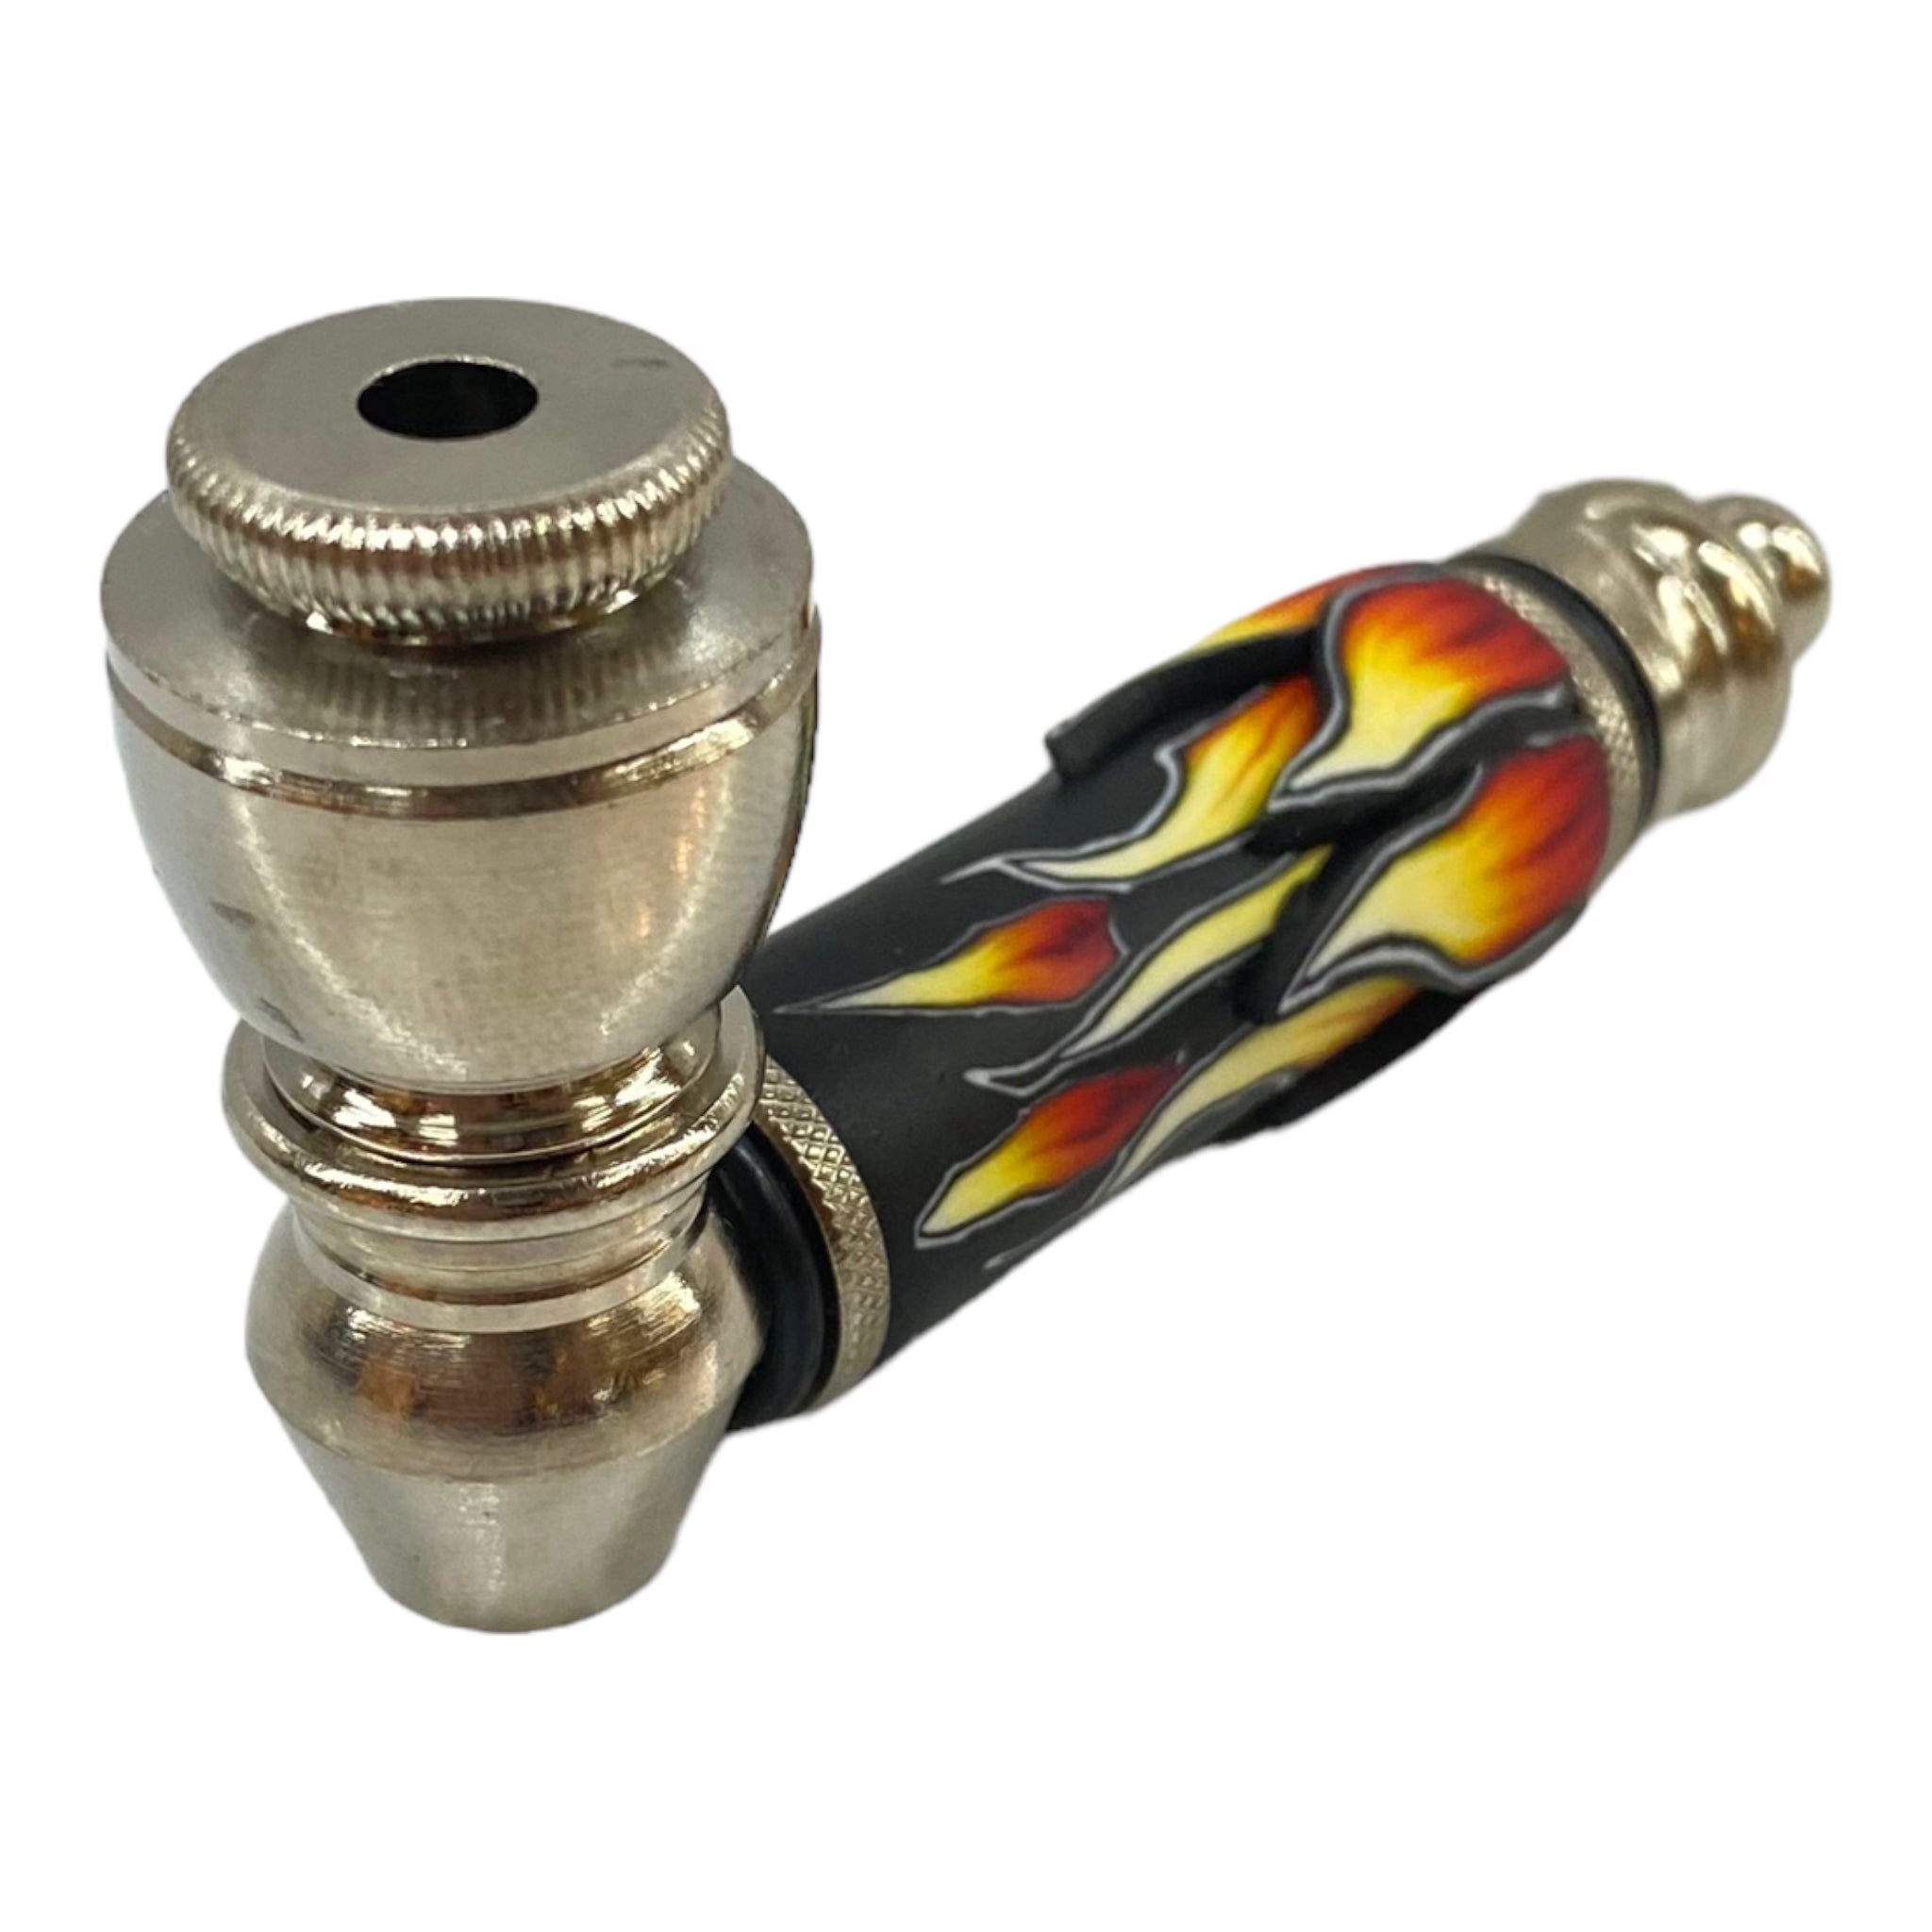 Metal Hand Pipes - Silver Chrome Hand Pipe With Flames